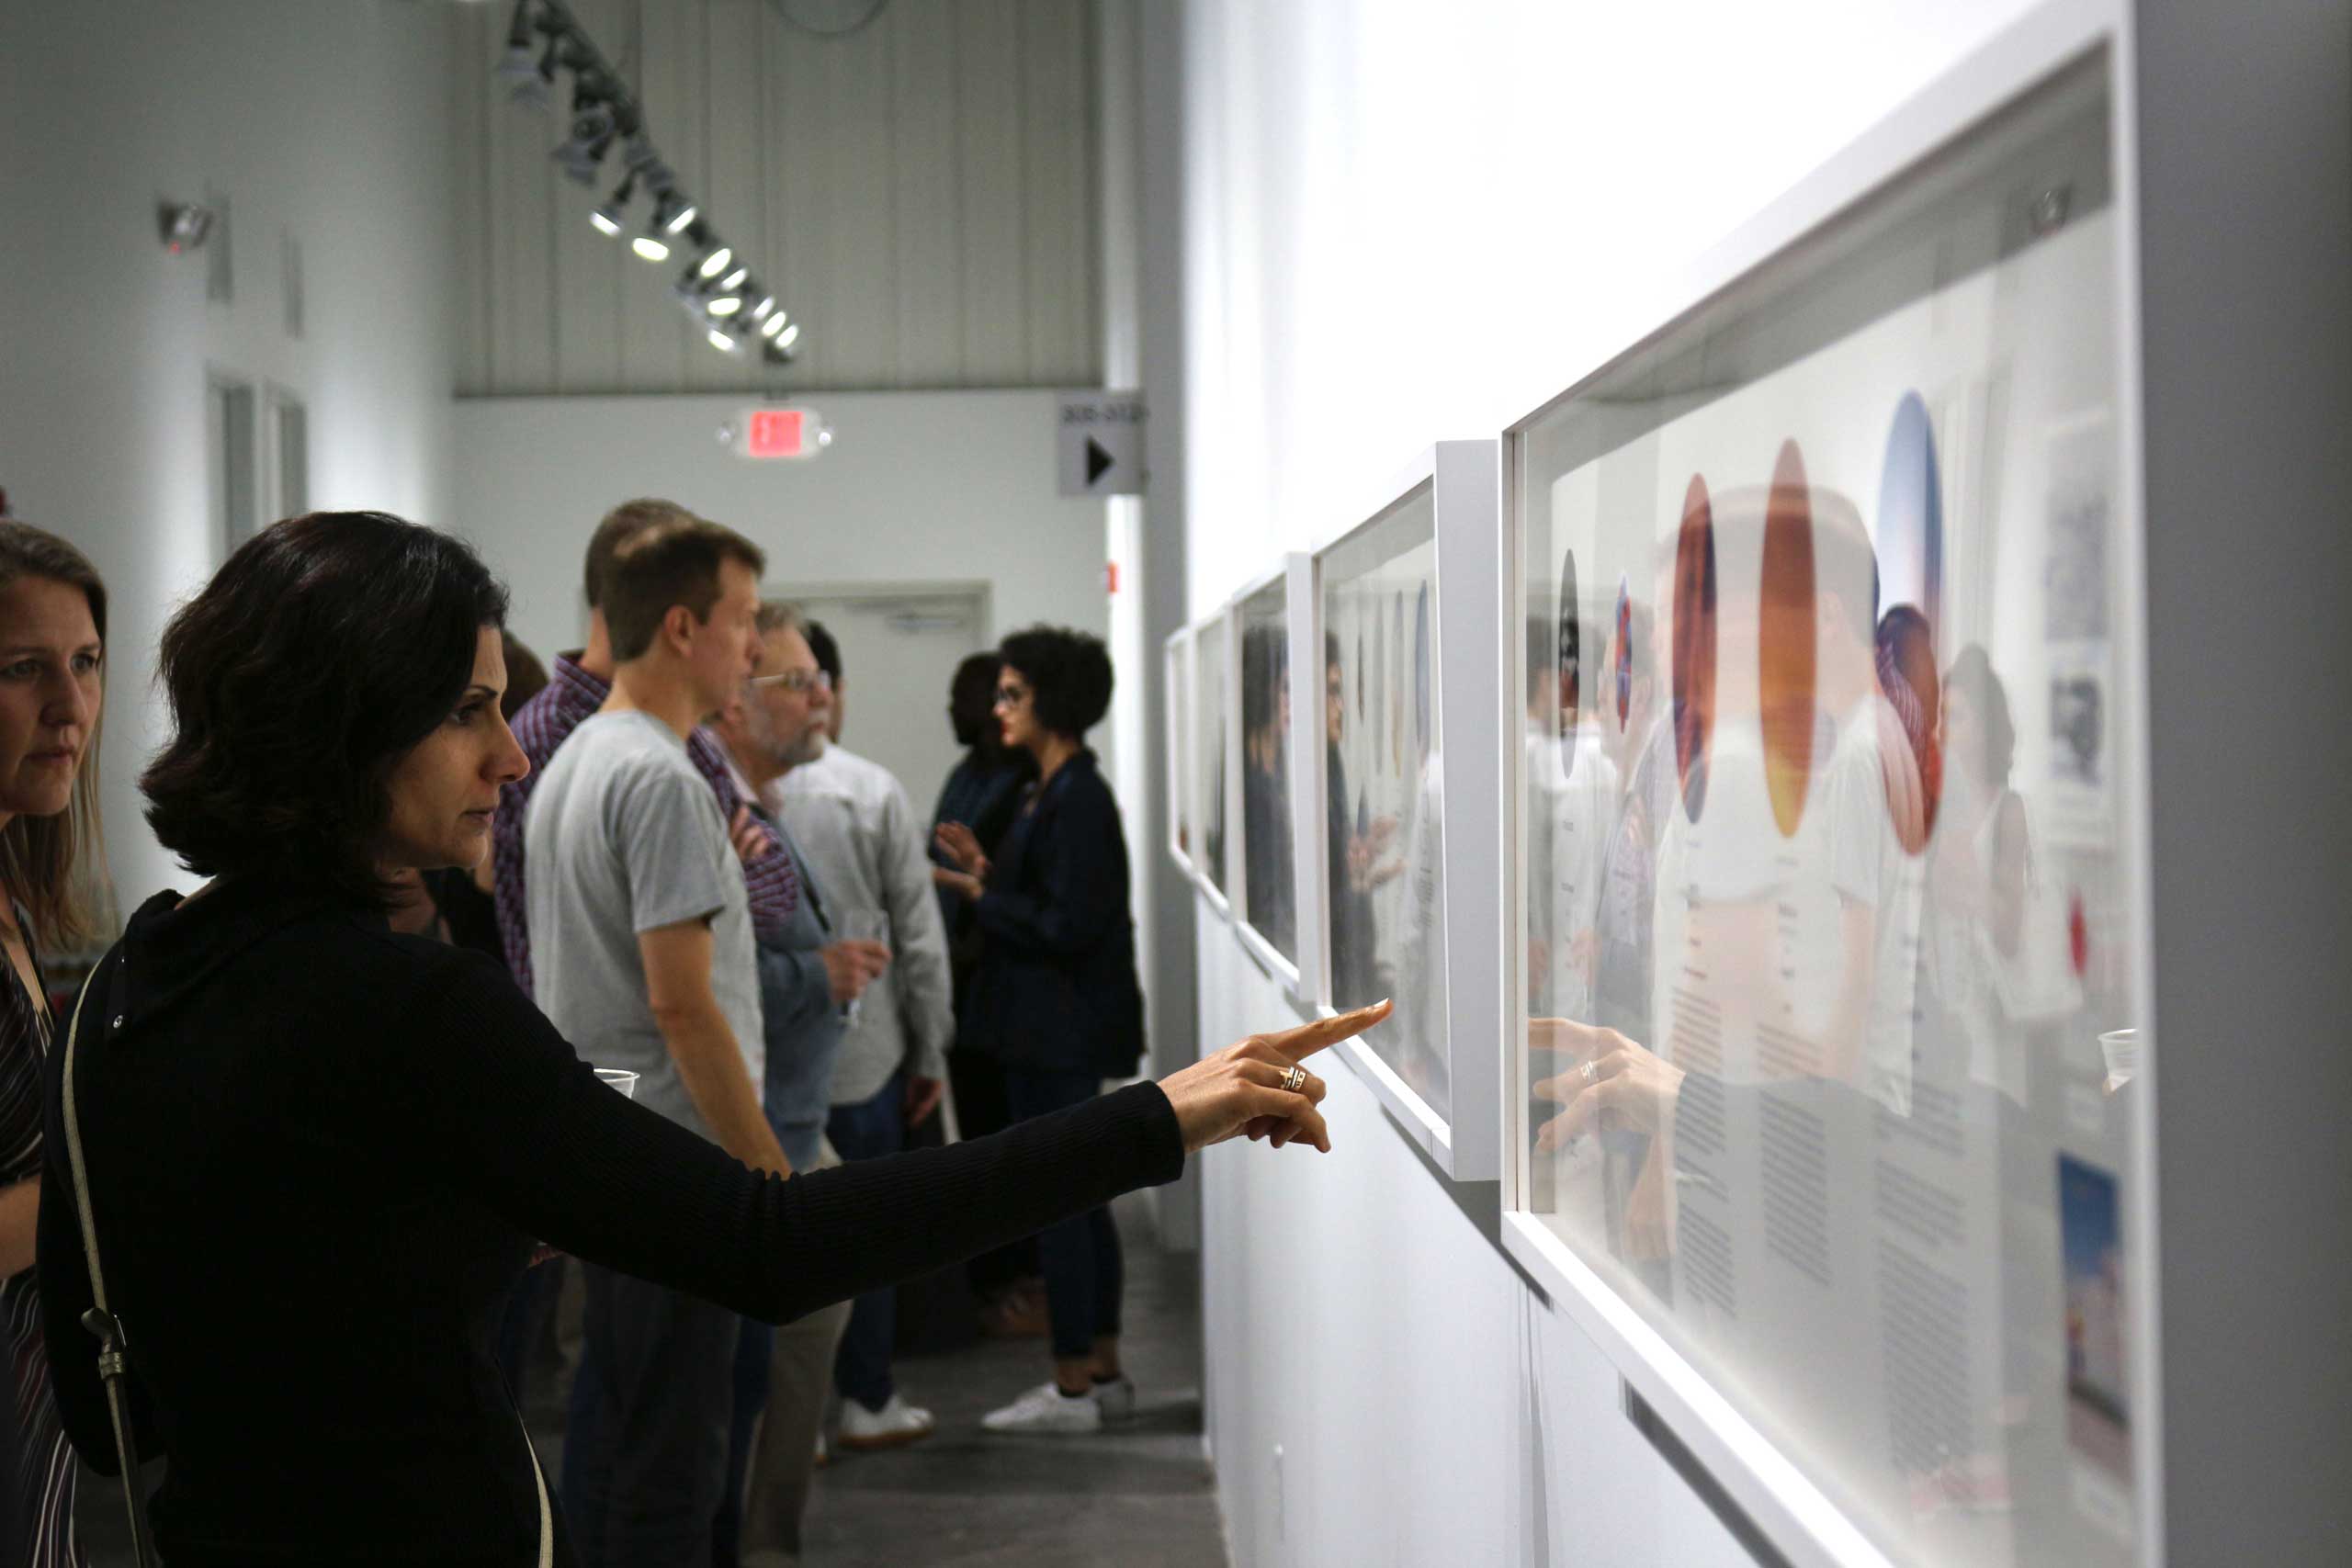 Attendees view work at FotoFest's Changing Circumstances exhibit. (Rachel Lowry for TIME)